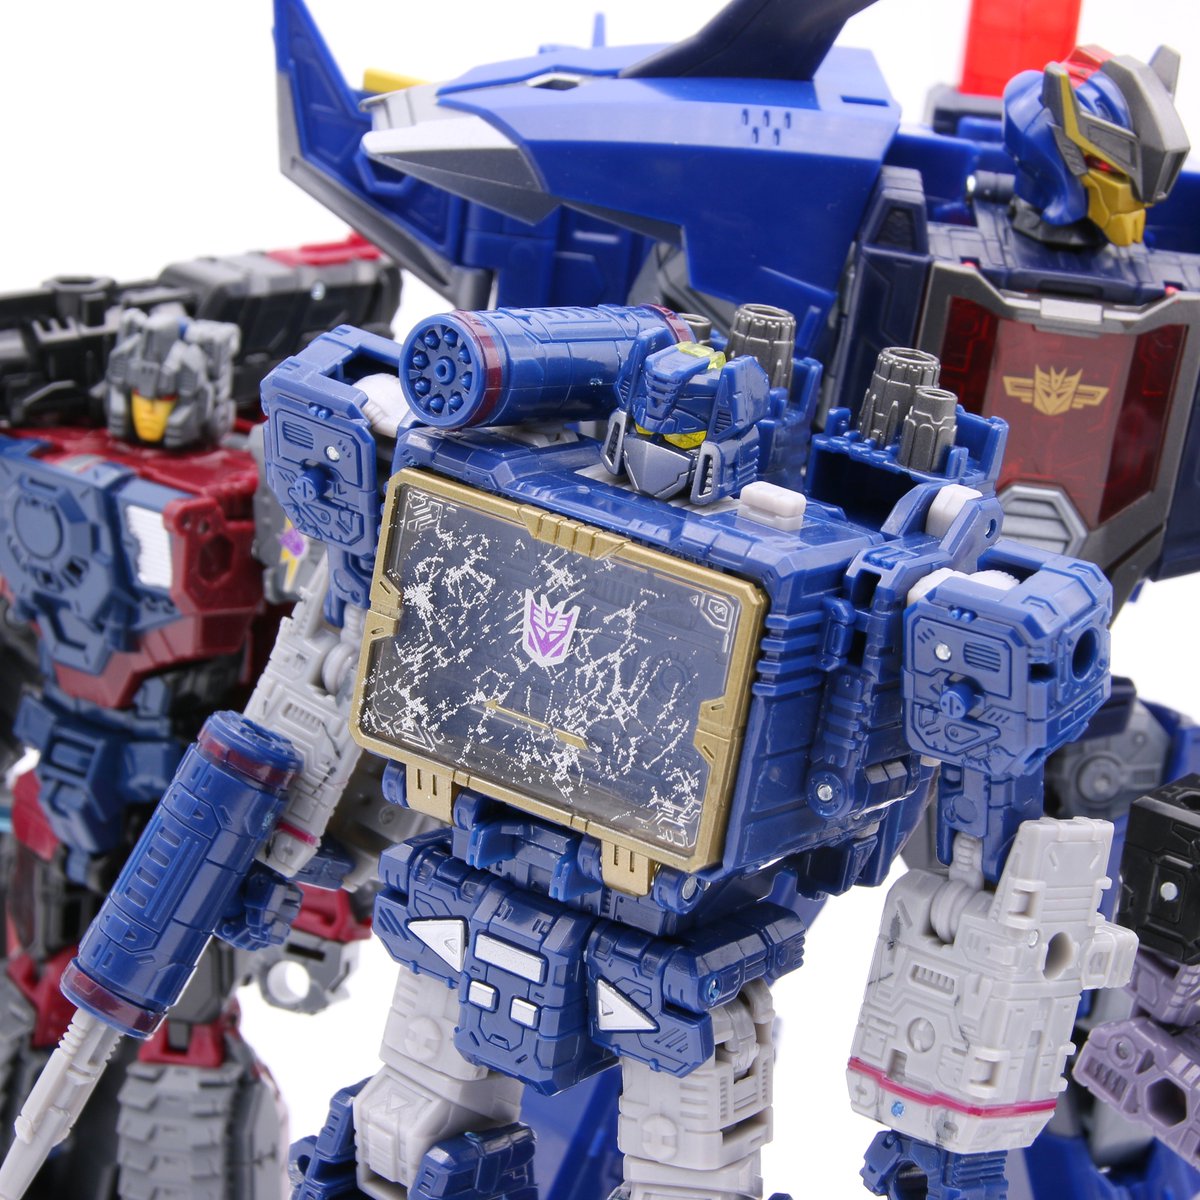 🔵 Soundwave, Dreadwing and Quake!

#transformers #toyphotography